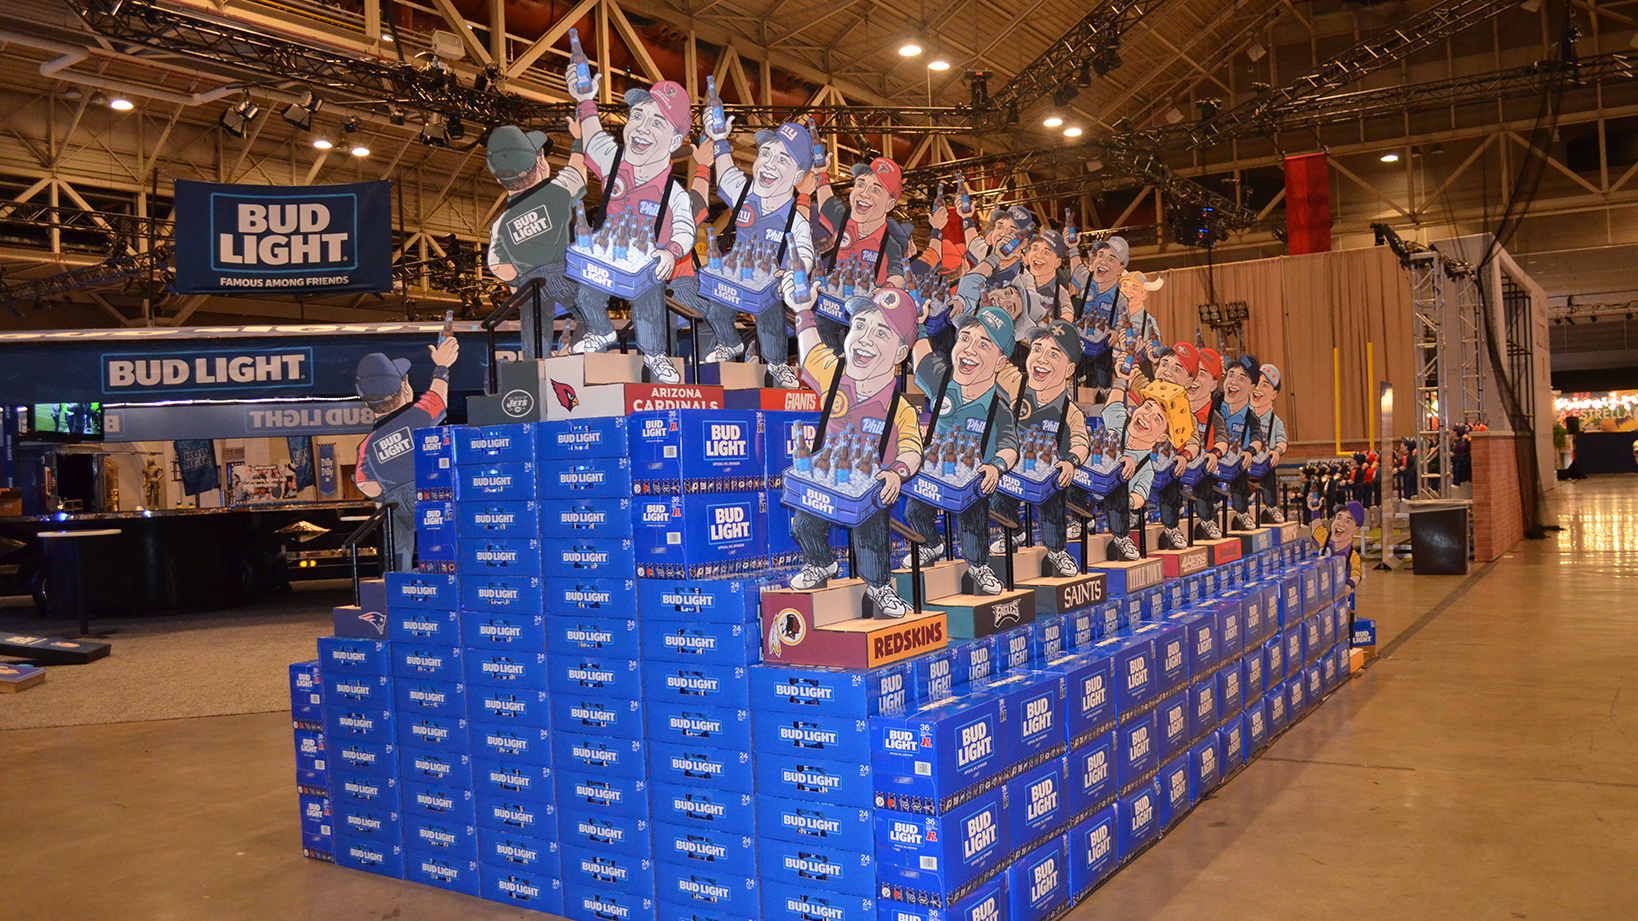 Bud Light Cases on Display at Trade Show